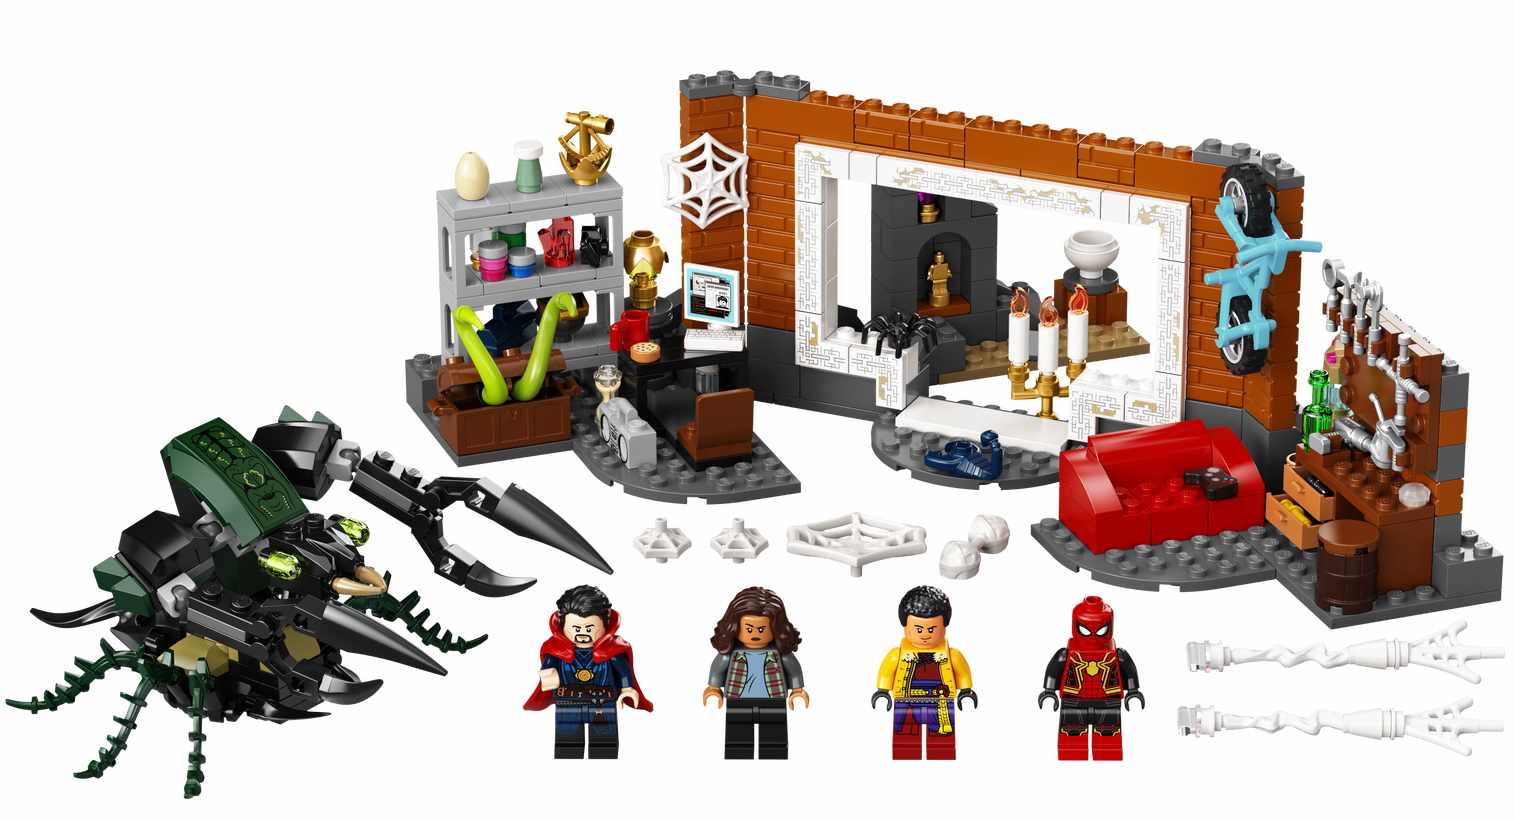 Spider-Man: No Way Home Sanctum Lego Set Available for Pre-Order